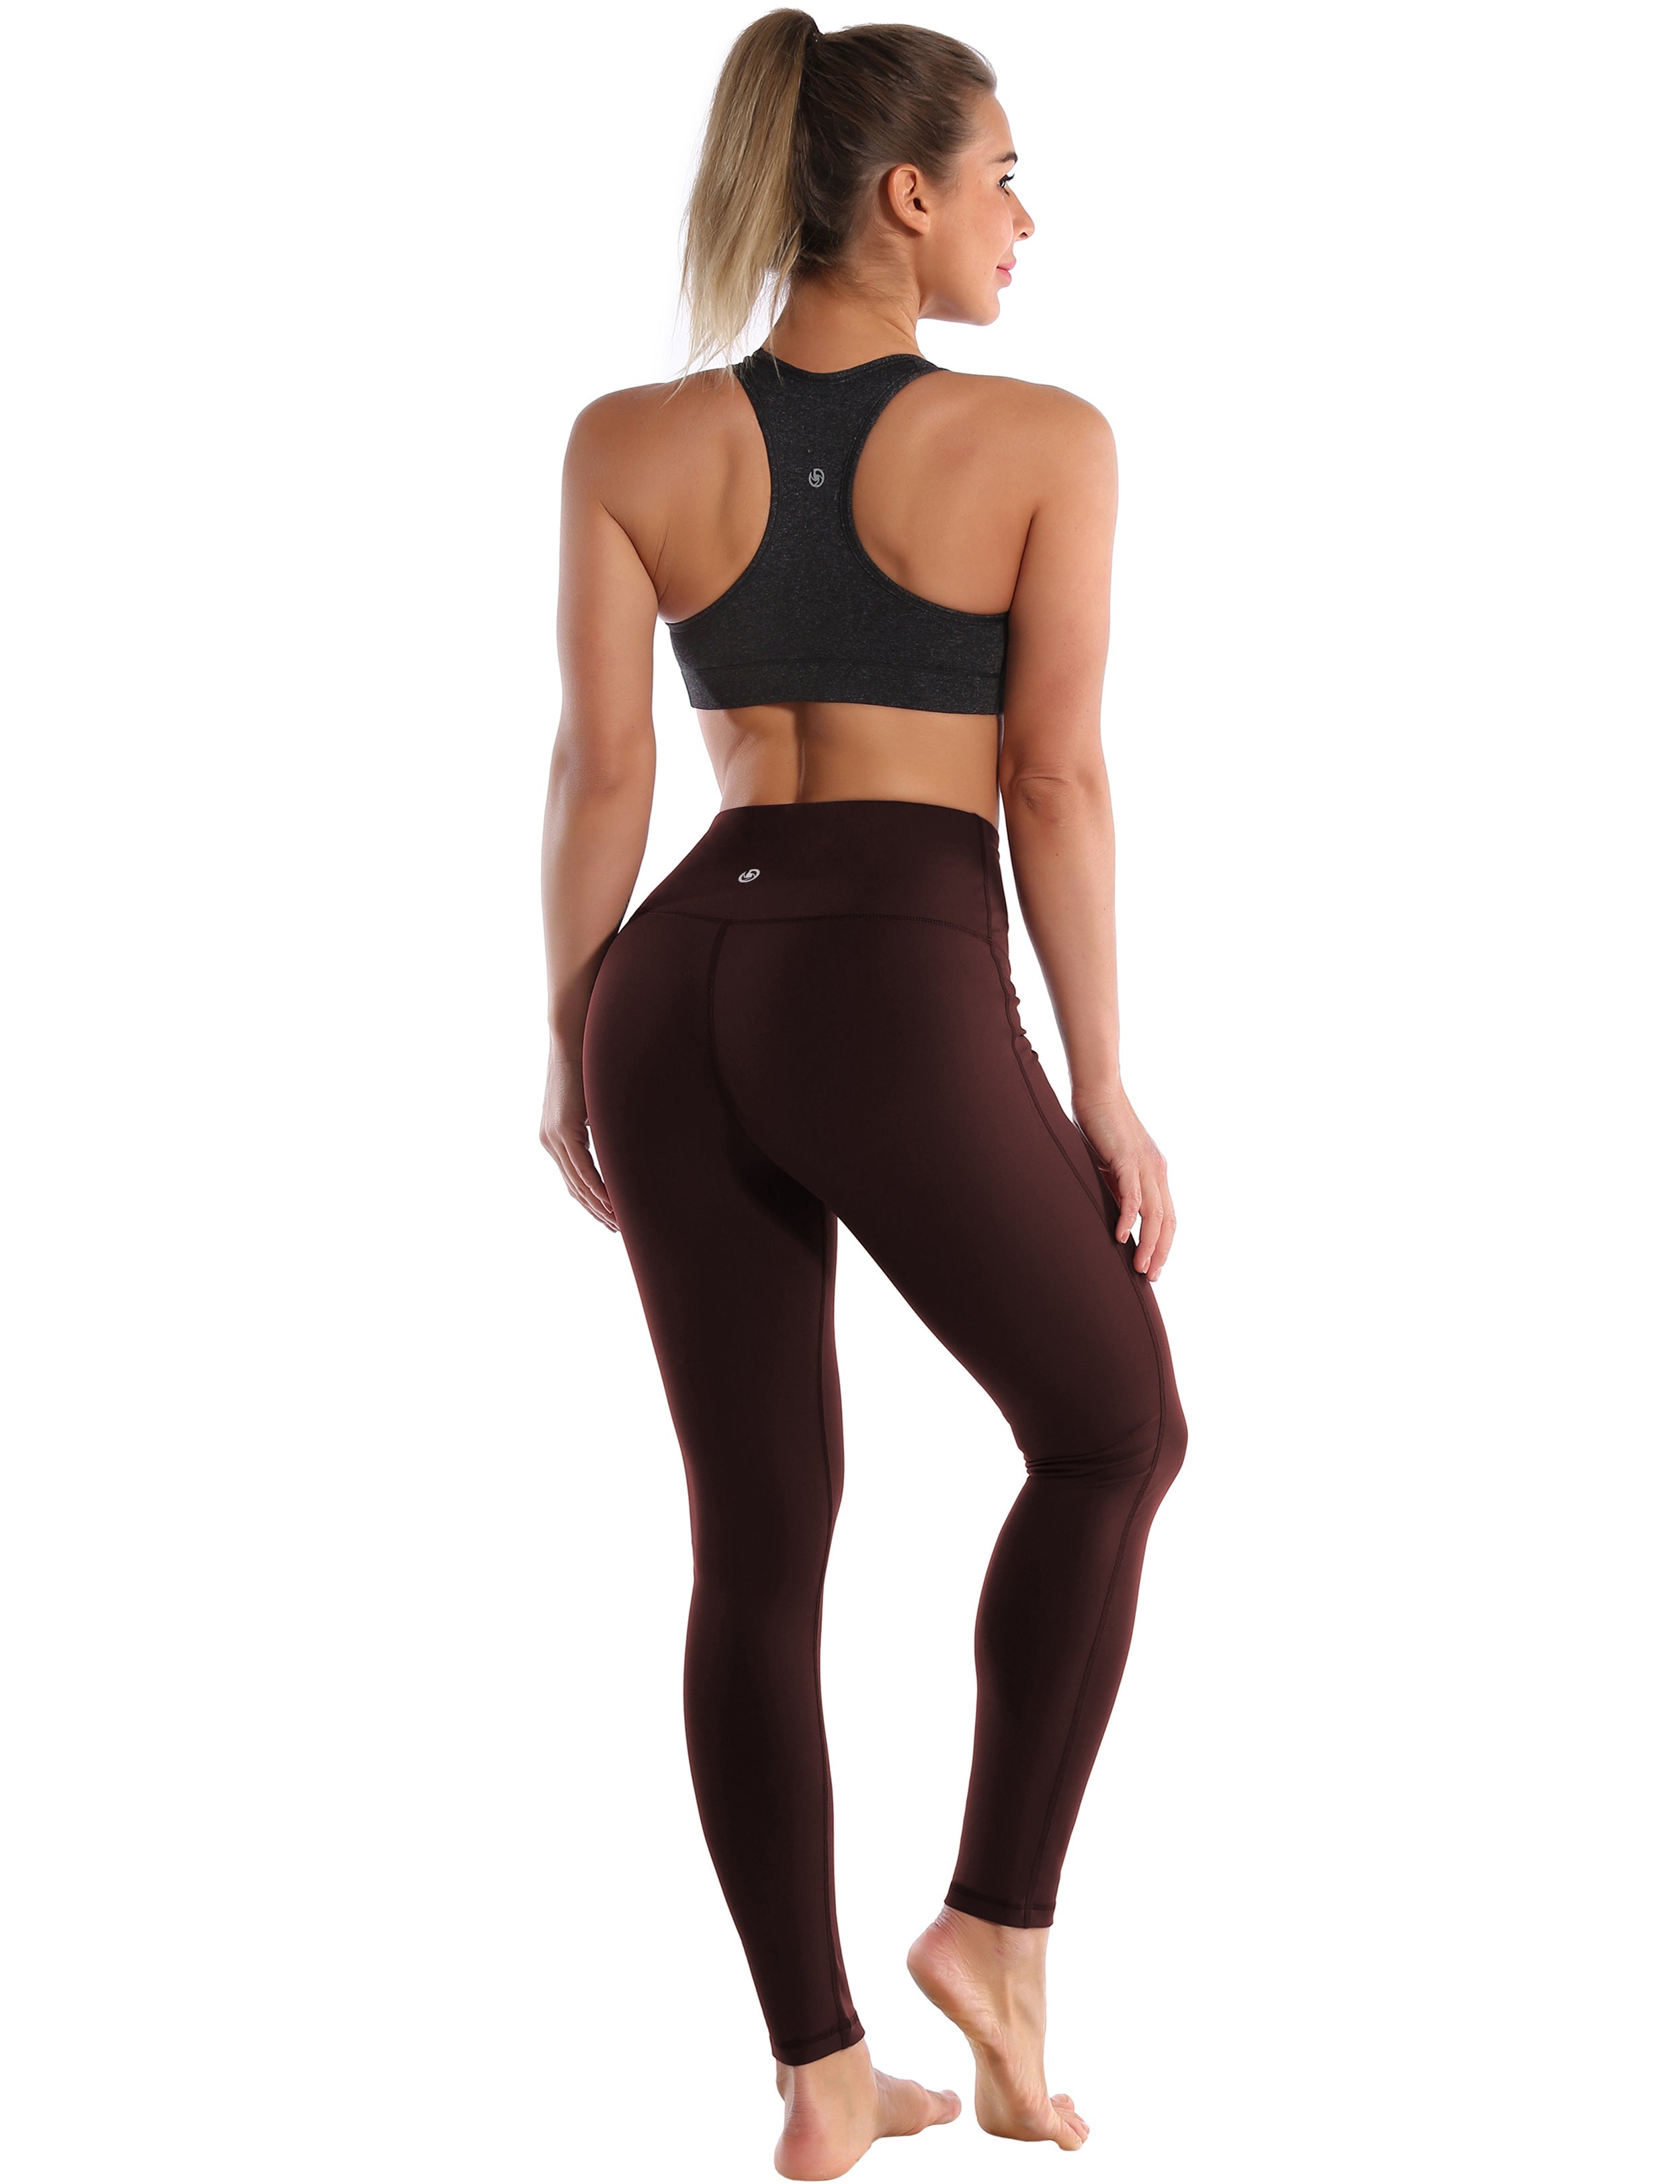 High Waist Side Line Biking Pants mahoganymaroon Side Line is Make Your Legs Look Longer and Thinner 75%Nylon/25%Spandex Fabric doesn't attract lint easily 4-way stretch No see-through Moisture-wicking Tummy control Inner pocket Two lengths